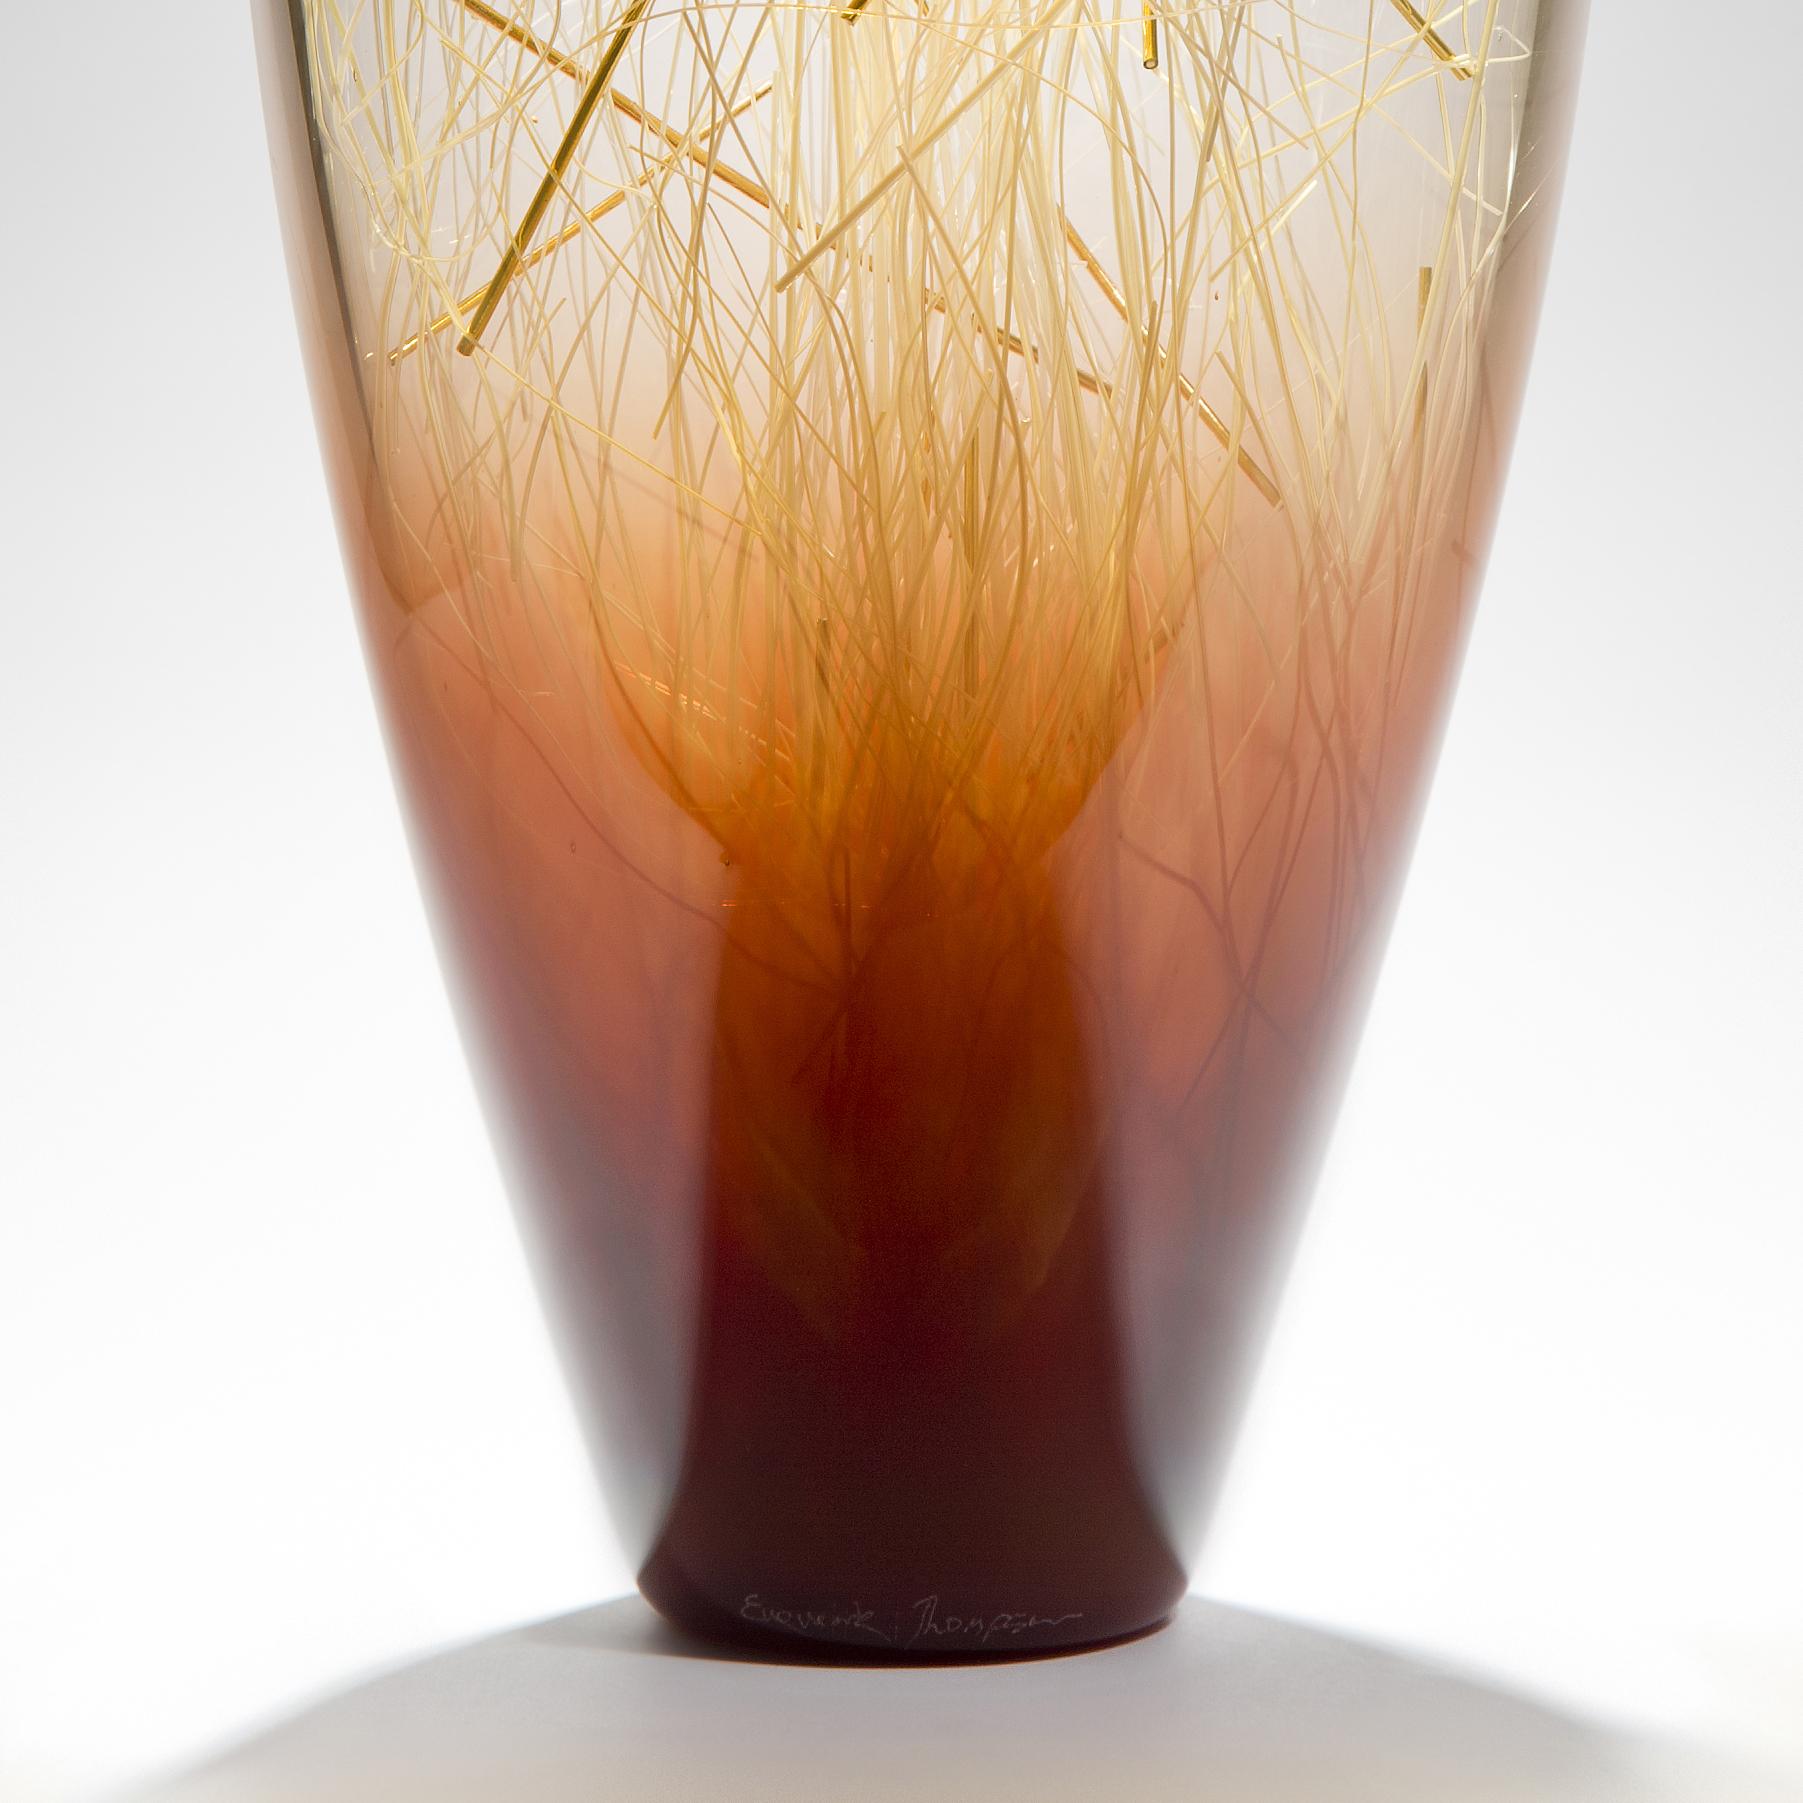 Organic Modern Ore in Amber and Coffee, a Unique glass Sculpture by Enemark & Thompson